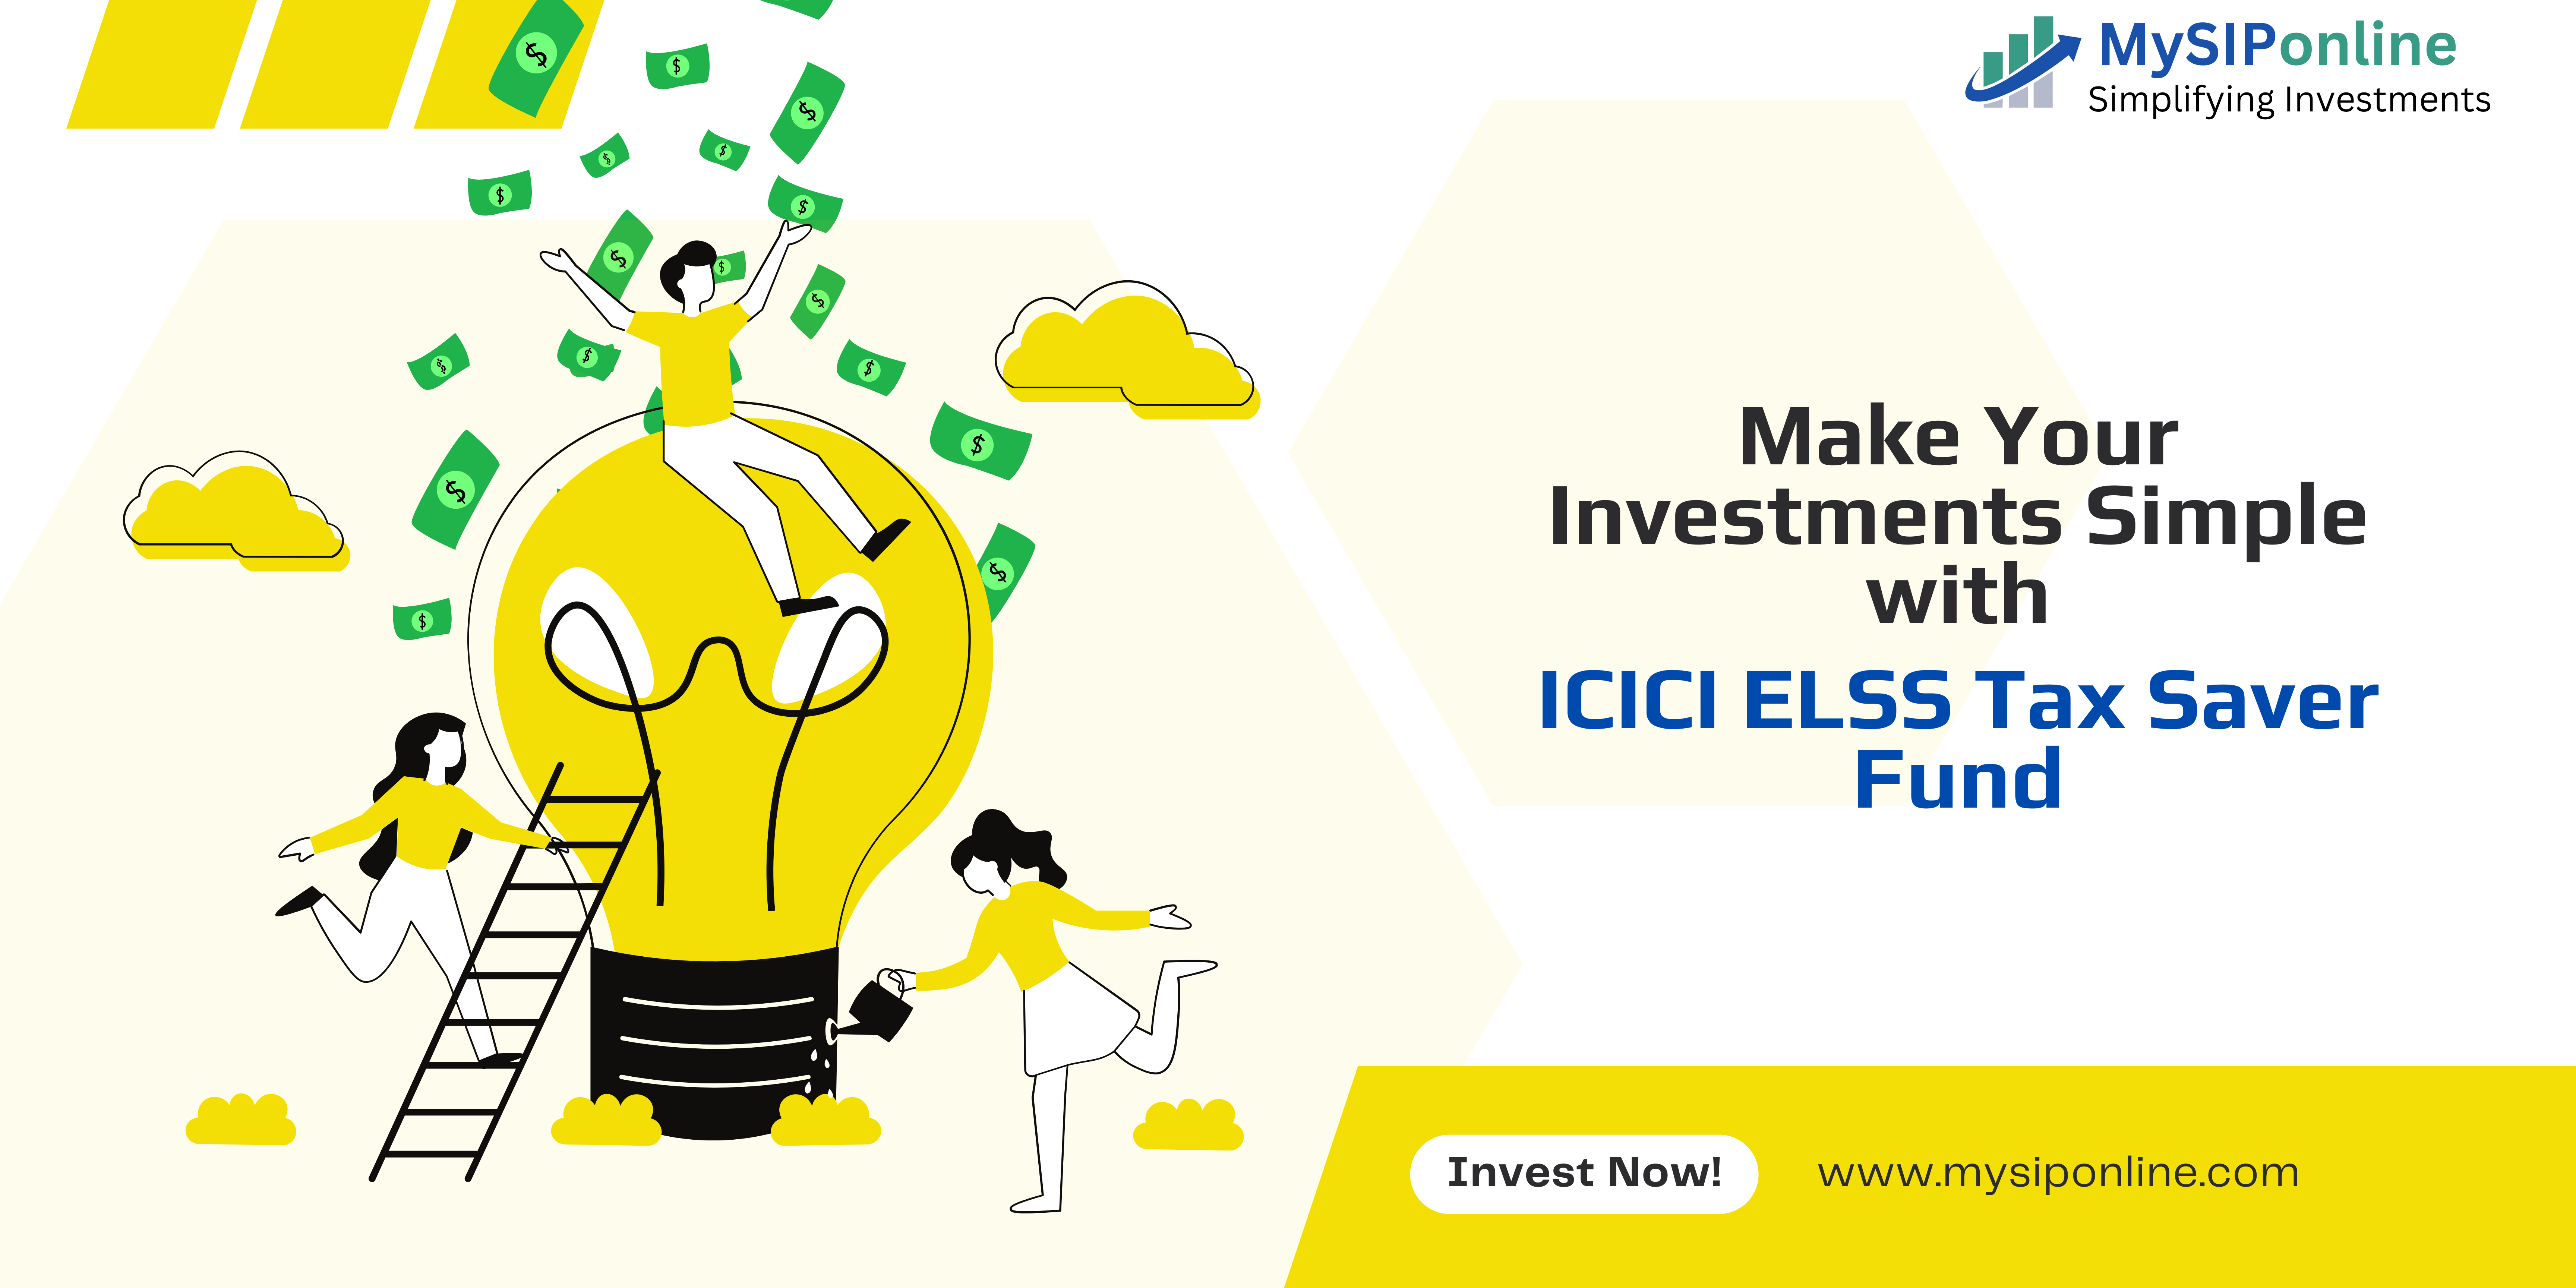 Make Your Investments Simple with ICICI ELSS Tax Saver Fund